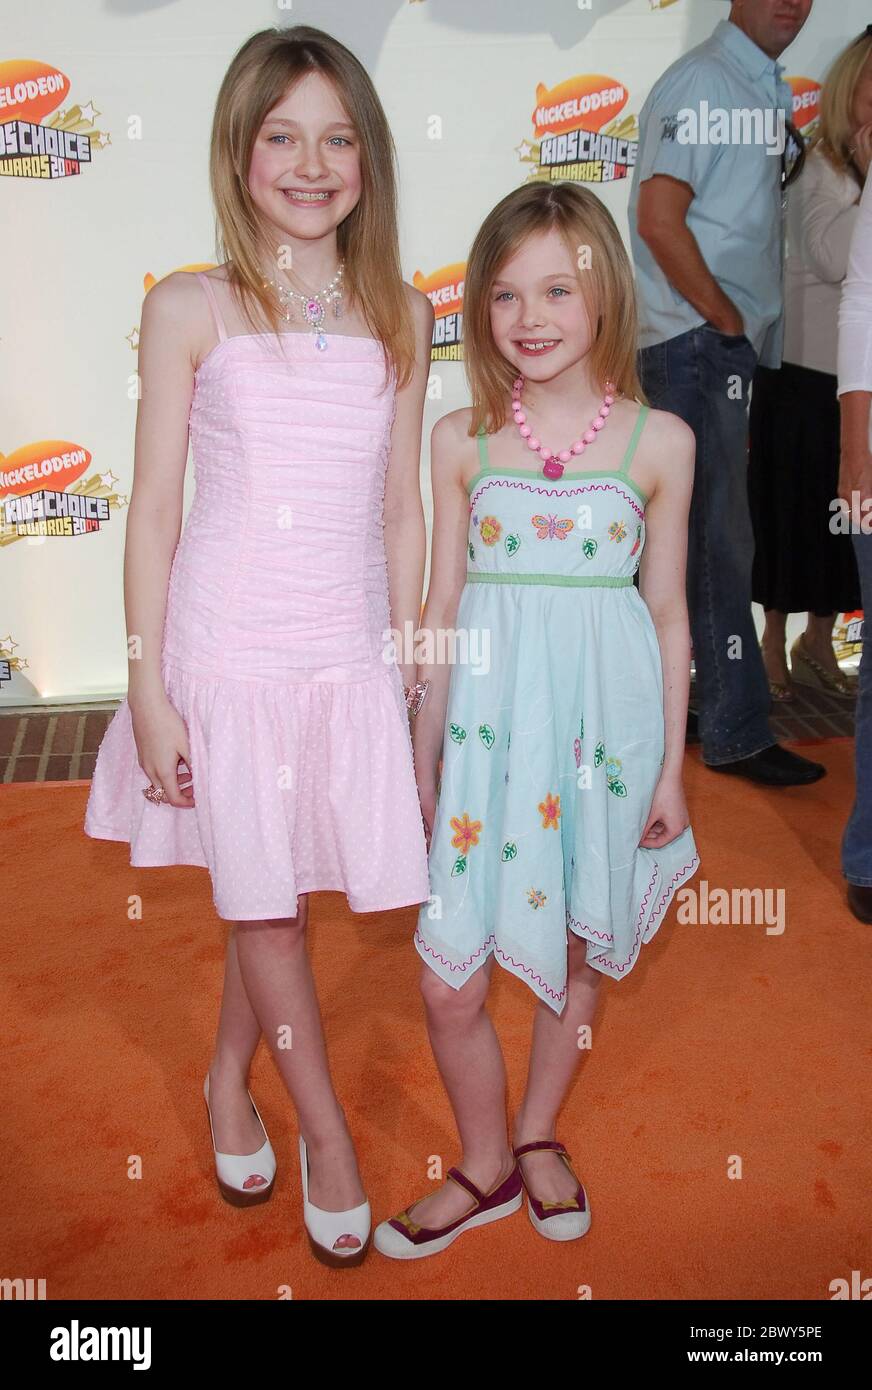 gået i stykker Tegne Perioperativ periode Dakota Fanning and Elle Fanning at the Nickelodeon's 20th Annual Kids'  Choice Awards held at UCLA's Pauley Pavilion in Westwood, CA. The event  took place on Saturday, March 31, 2007. Photo by: